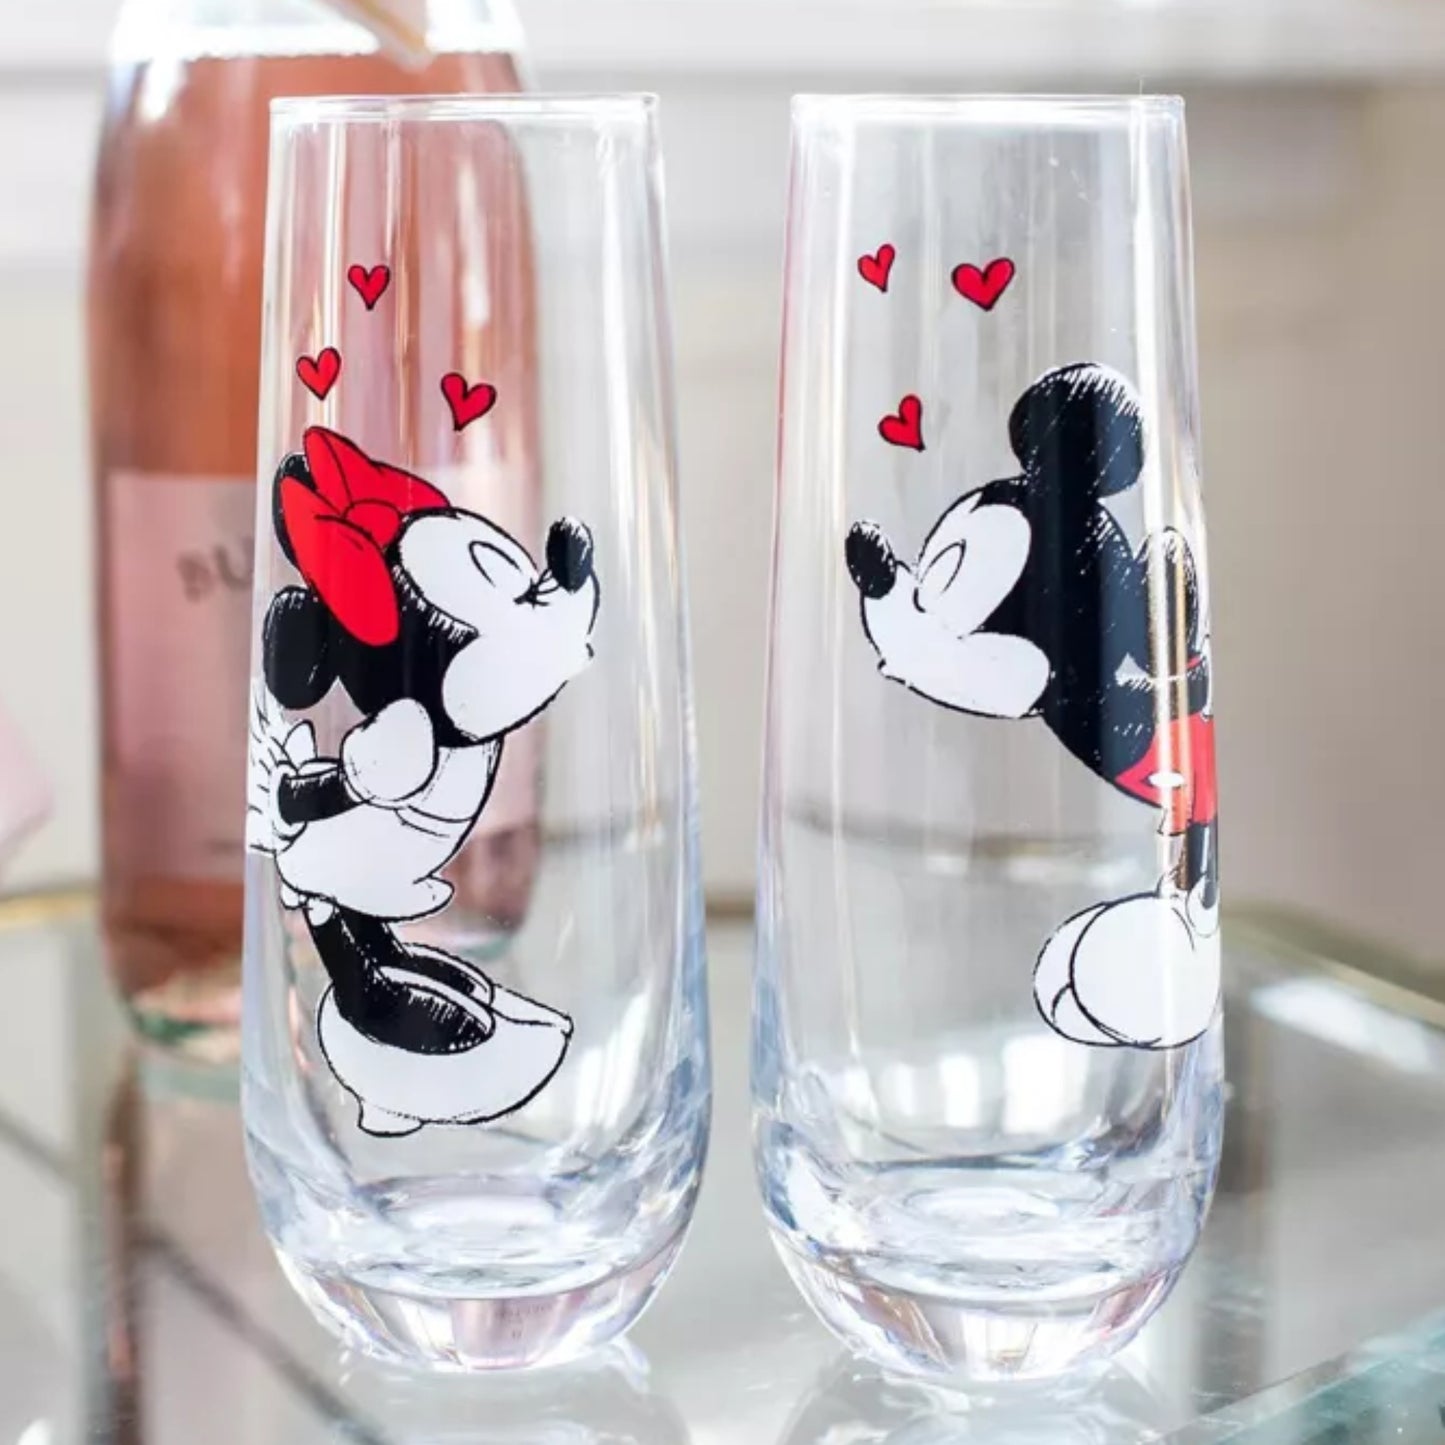 Load image into Gallery viewer, Mickey and Minnie Mouse Kissing Hearts (Disney) 9oz Fluted Glassware Set of 2
